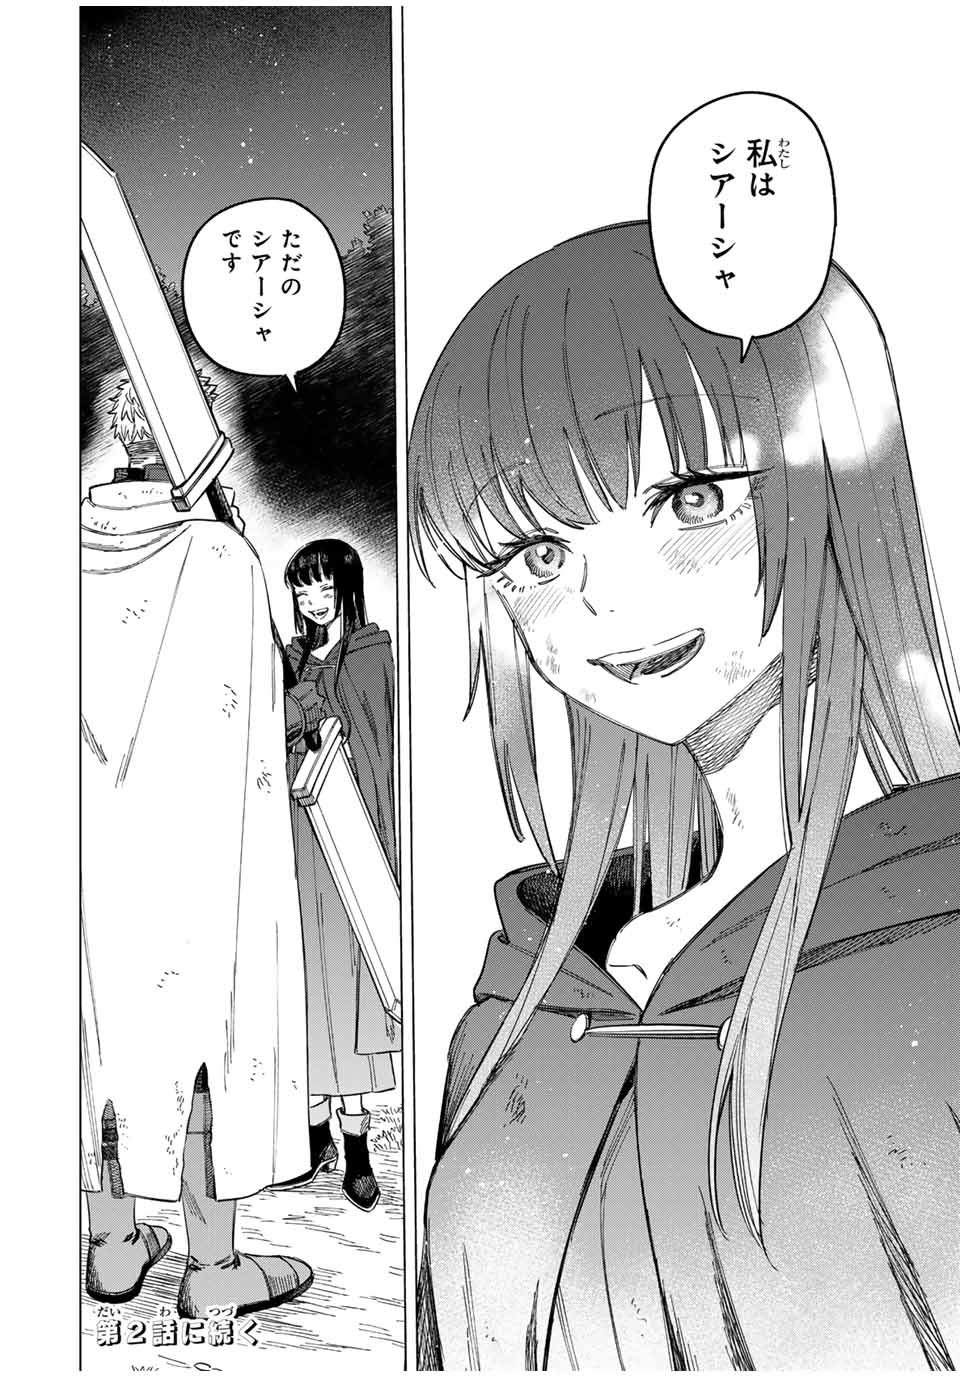 Witch and Mercenary 魔女と傭兵 第1.3話 - Page 24